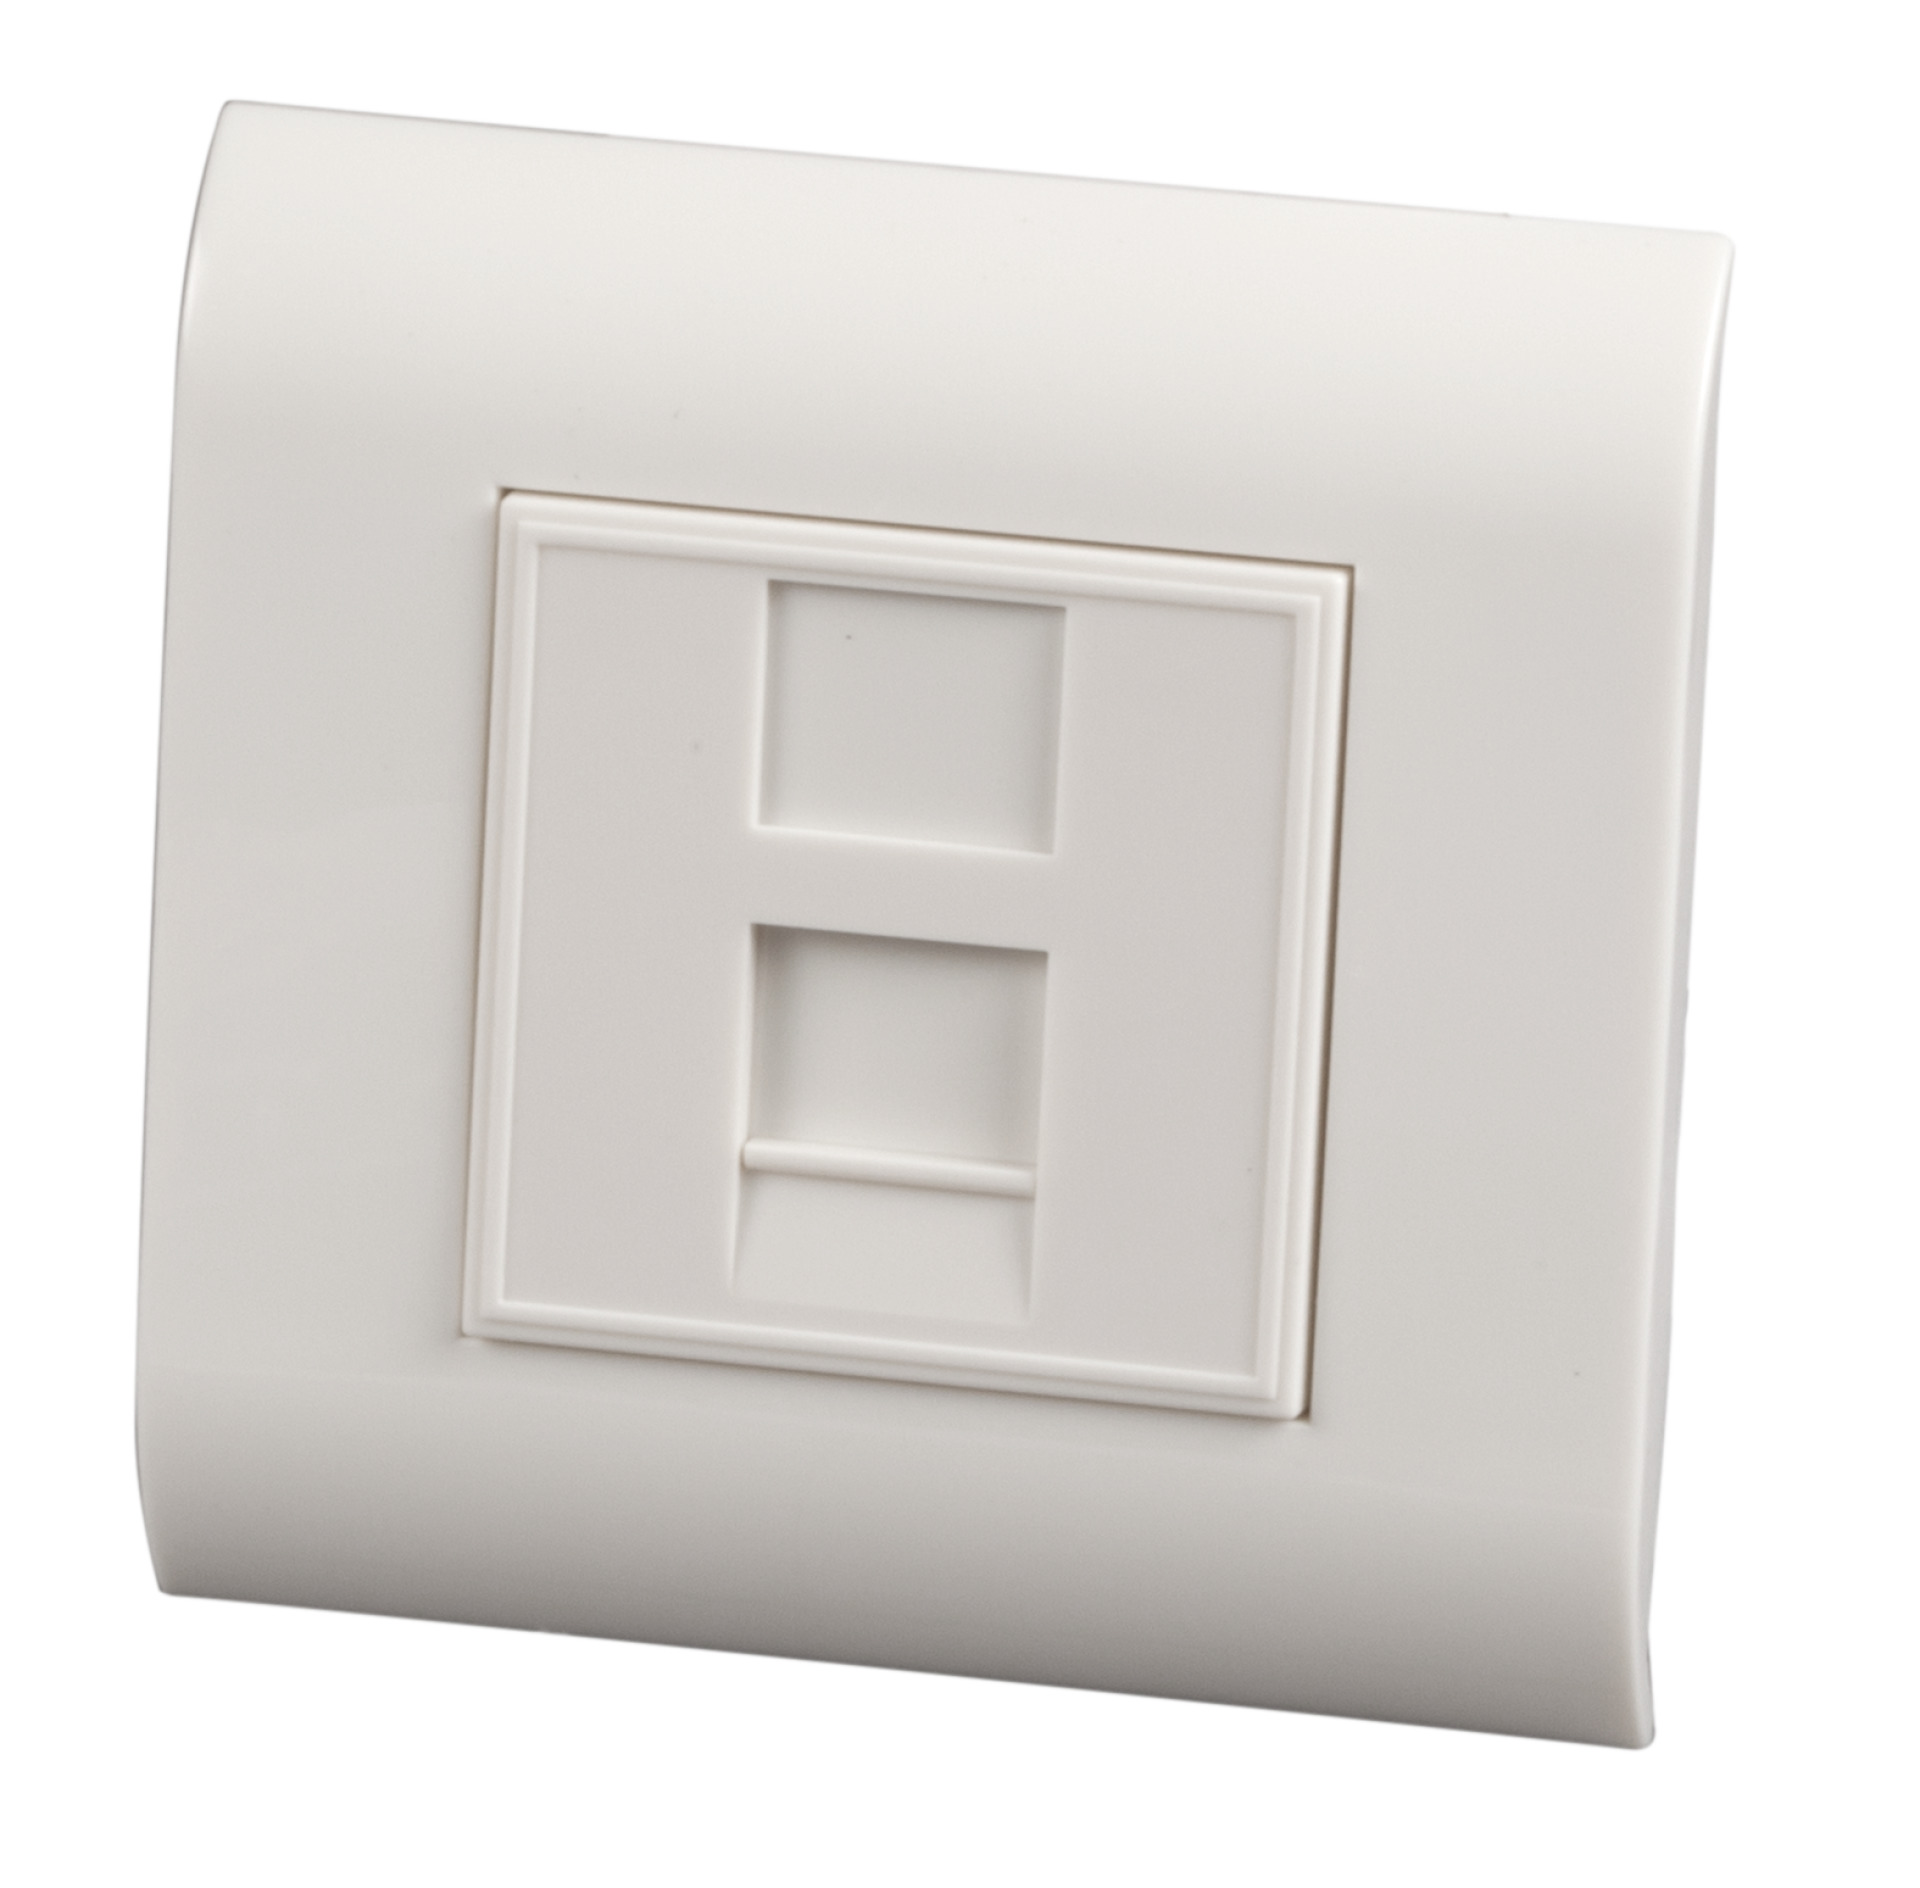 Frame Set 80x80 with central plate 45x45 for 1 Keystone, outlet direct